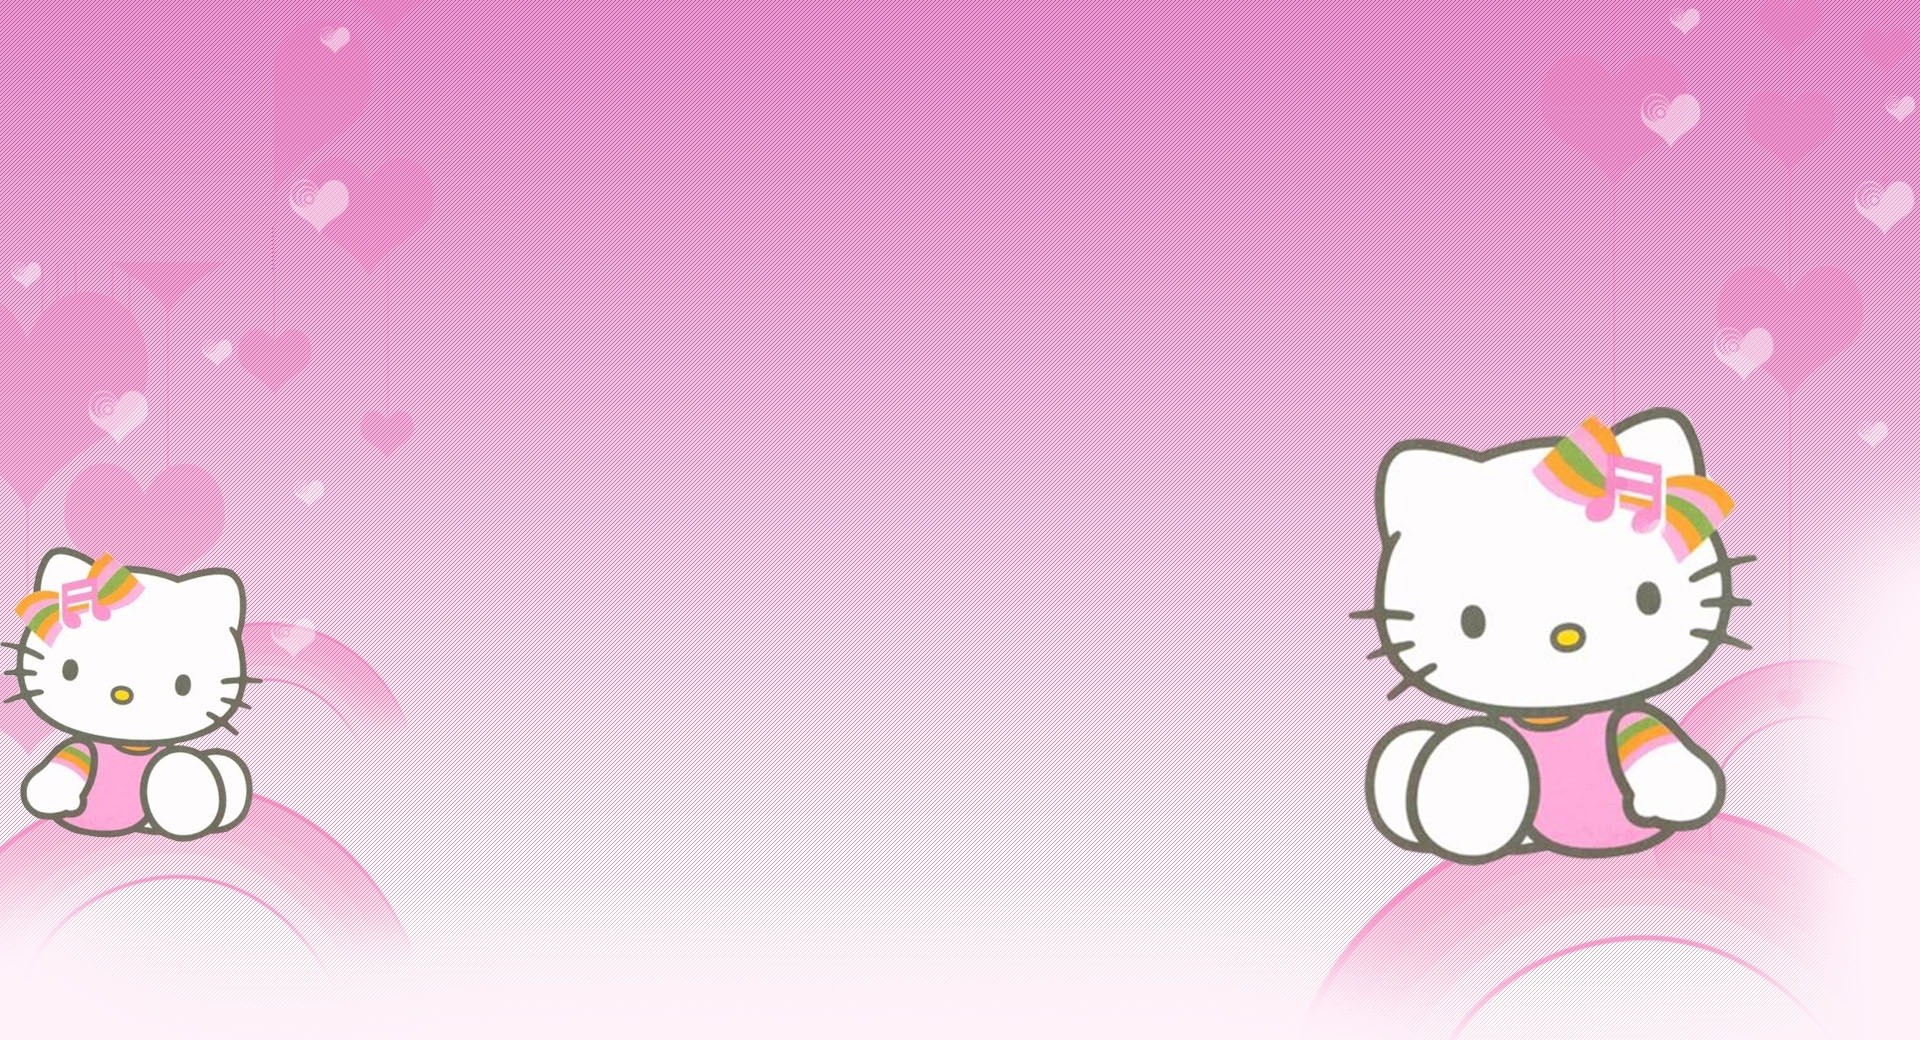 Free Download Hello Kitty Thanksgiving Love Virgo Pictures and other